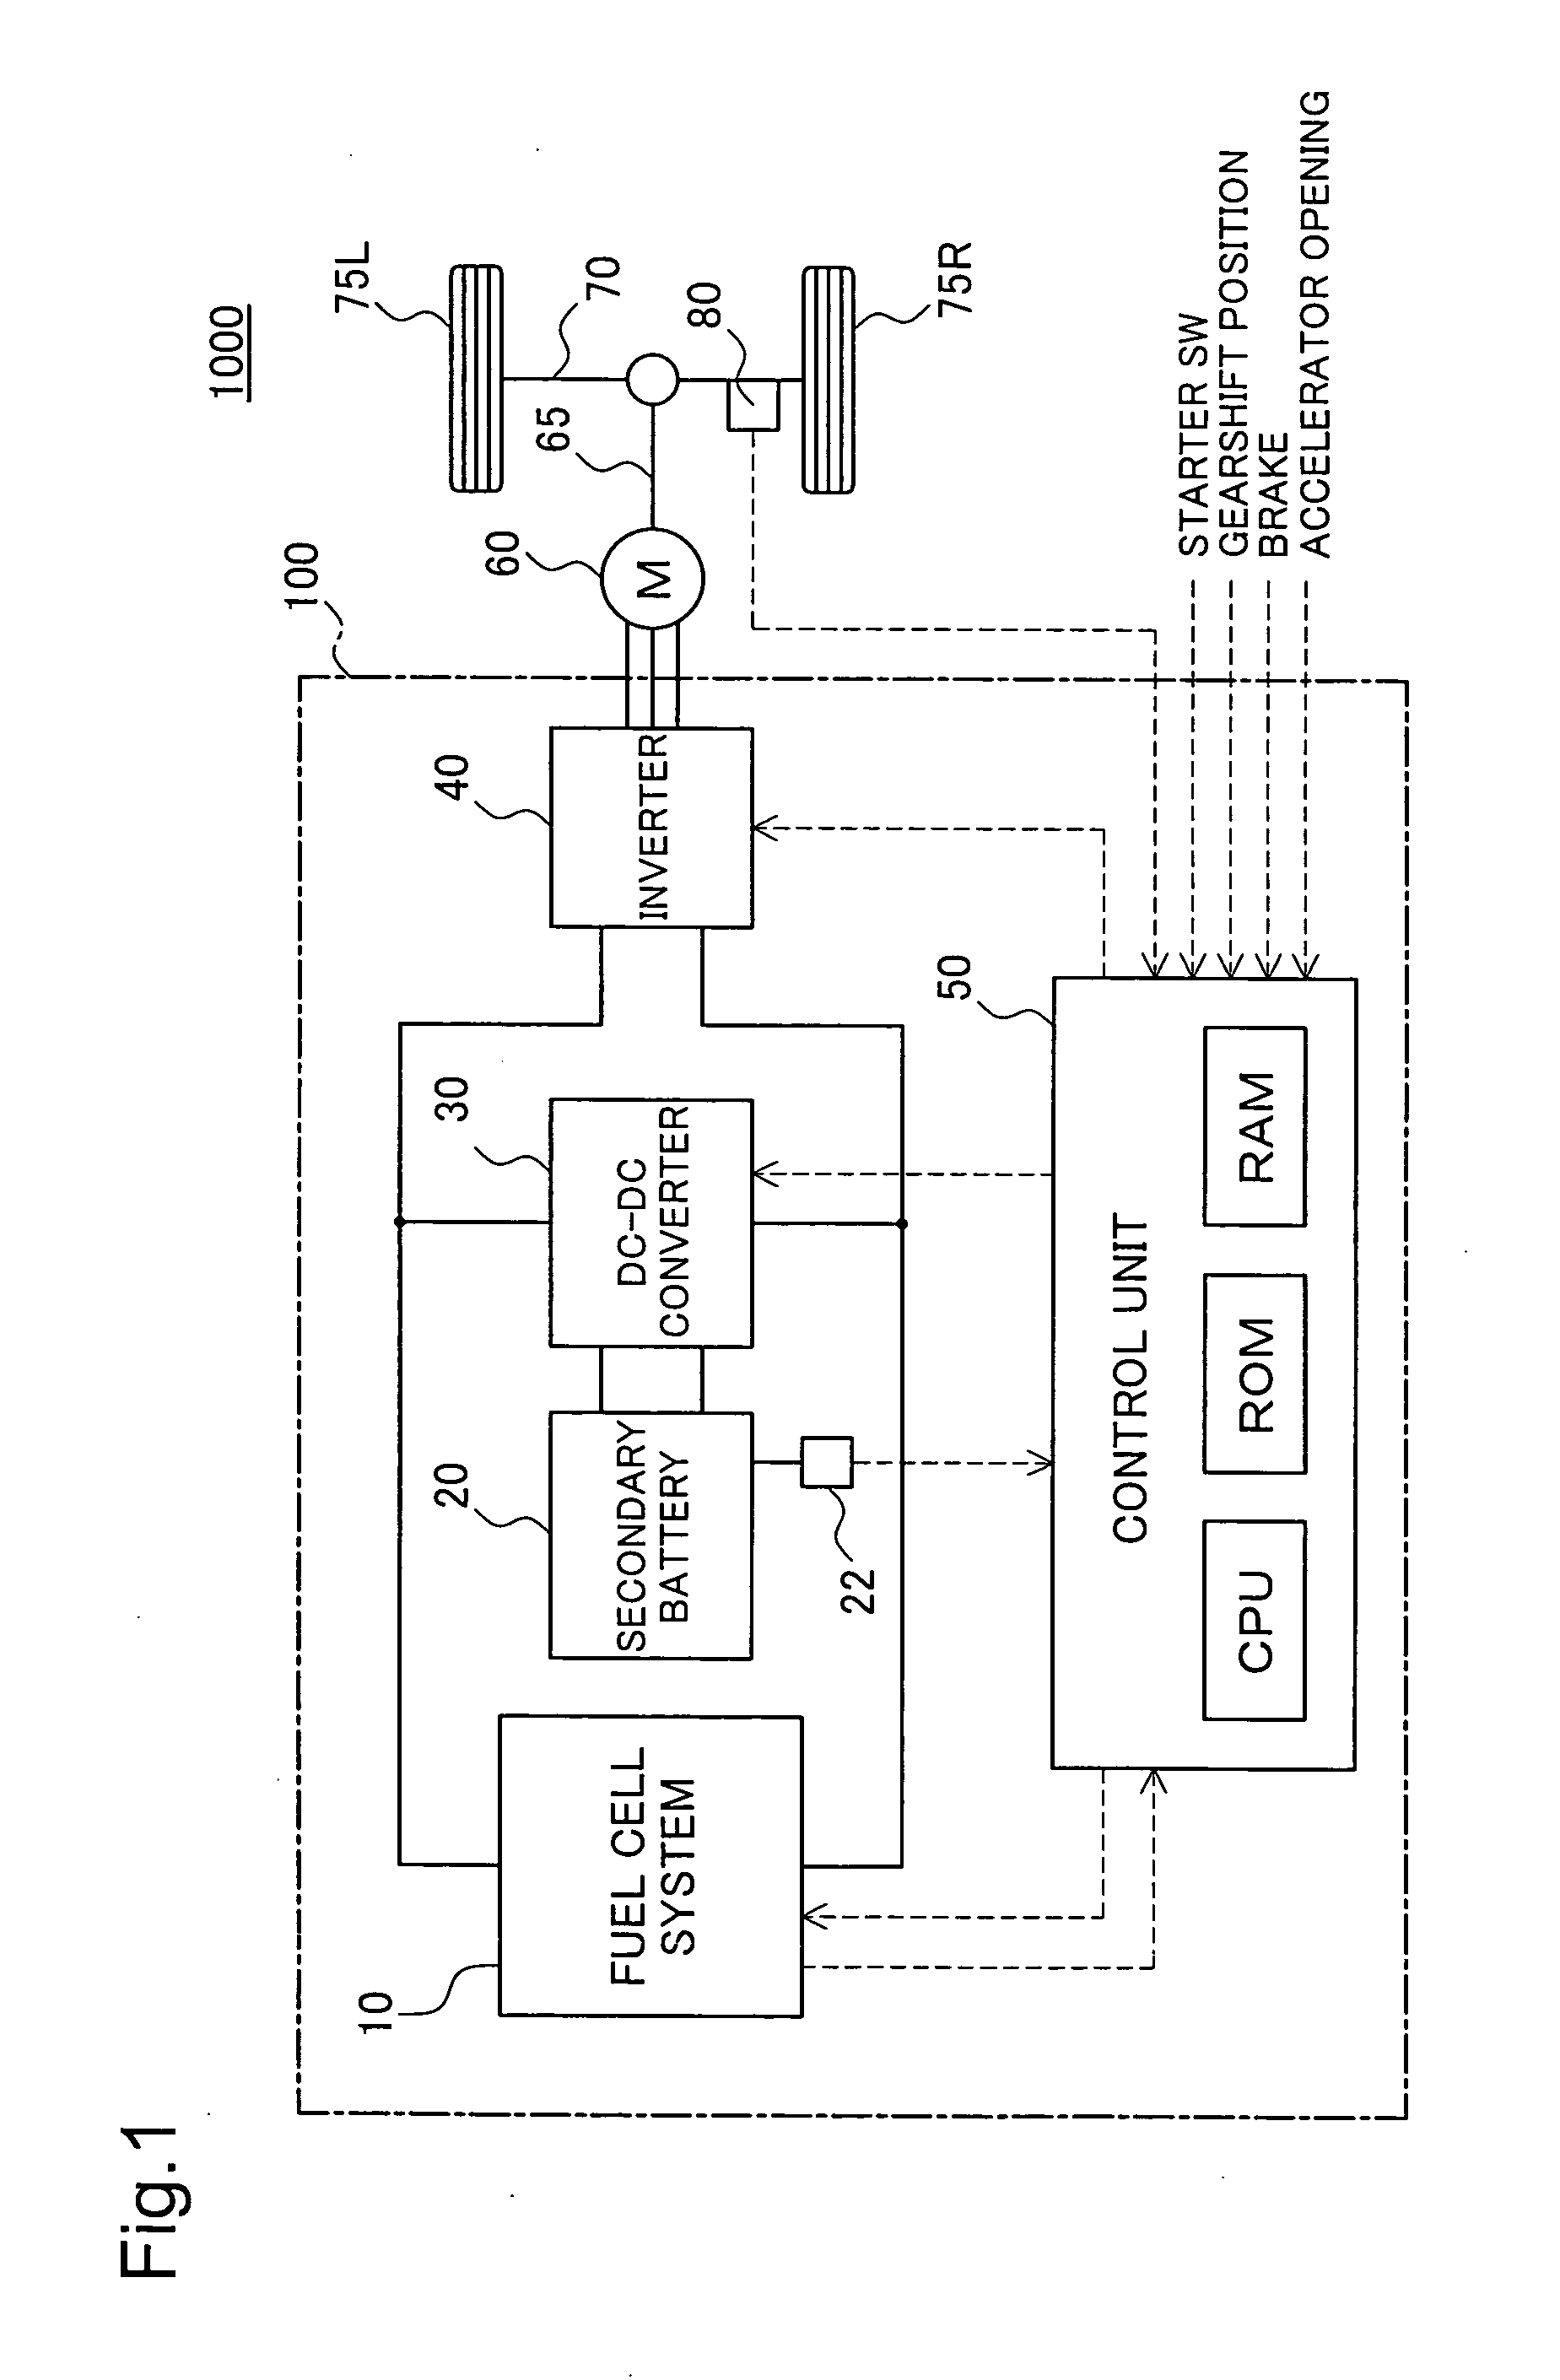 Drive control of power system including fuel cells